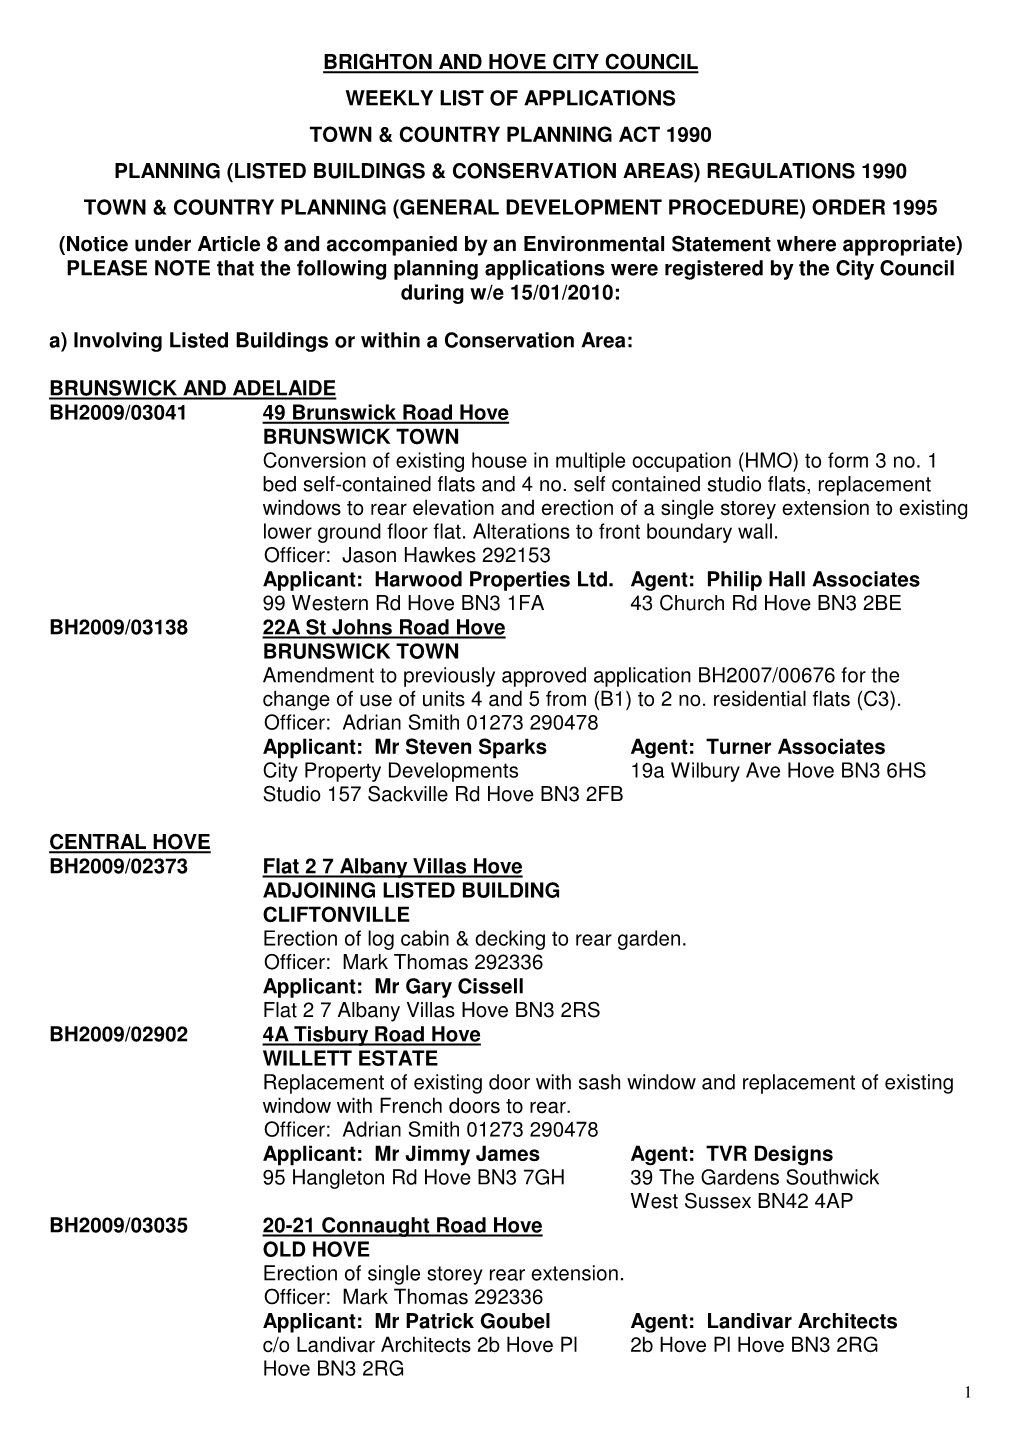 Brighton and Hove City Council Weekly List of Applications Town & Country Planning Act 1990 Planning (Listed Buildings &